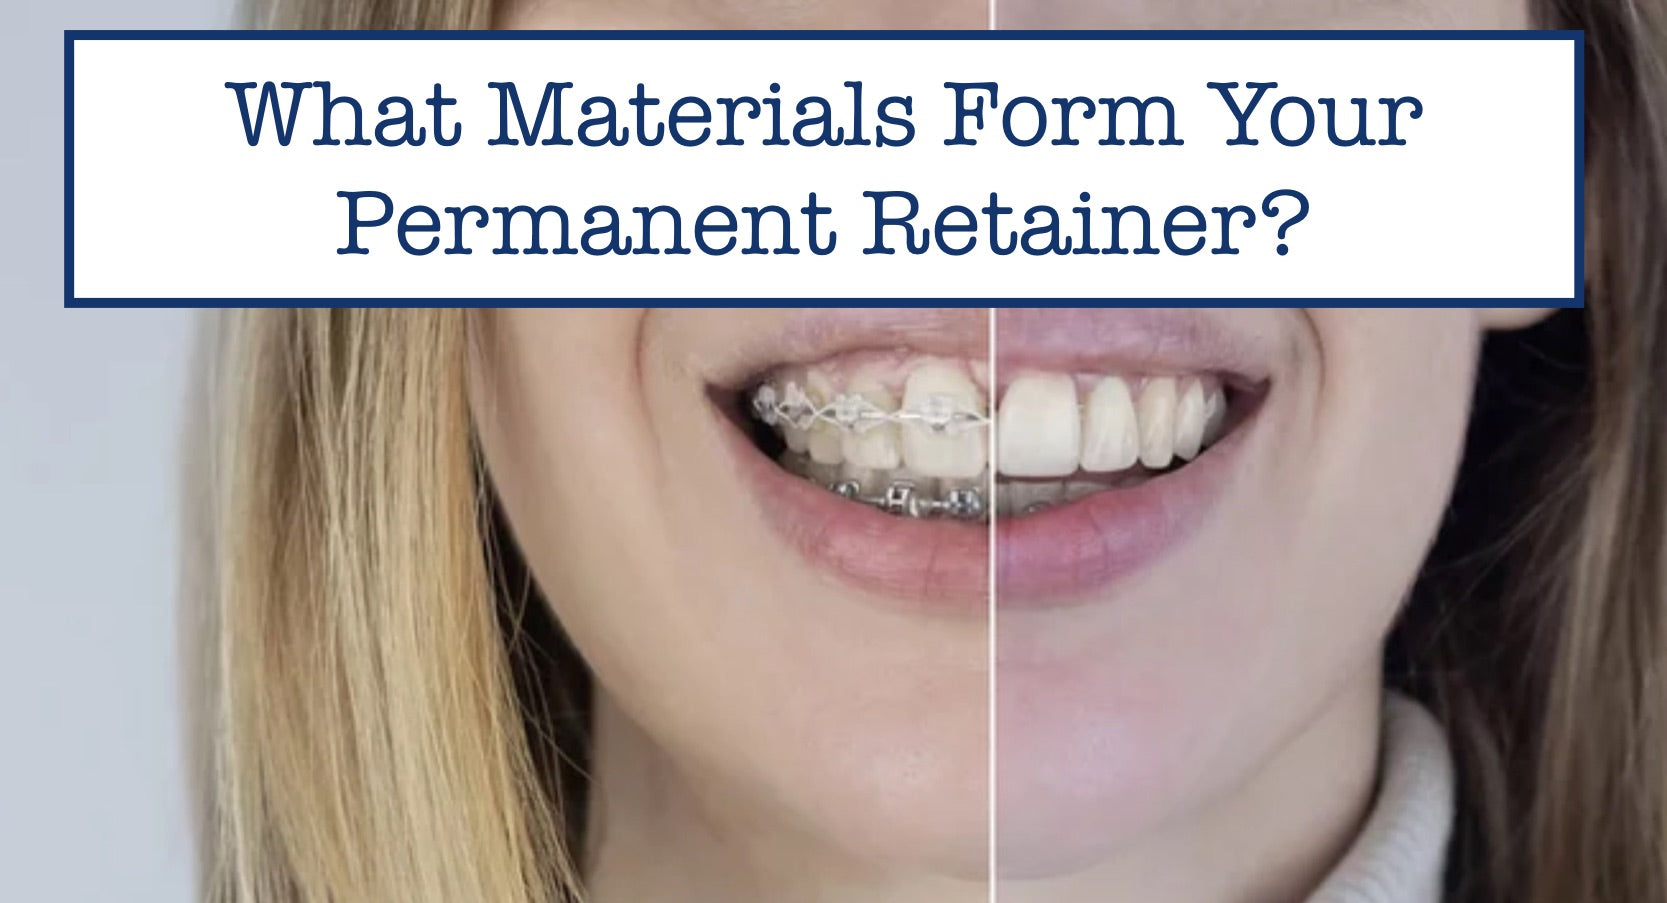 What Materials Form Your Permanent Retainer?